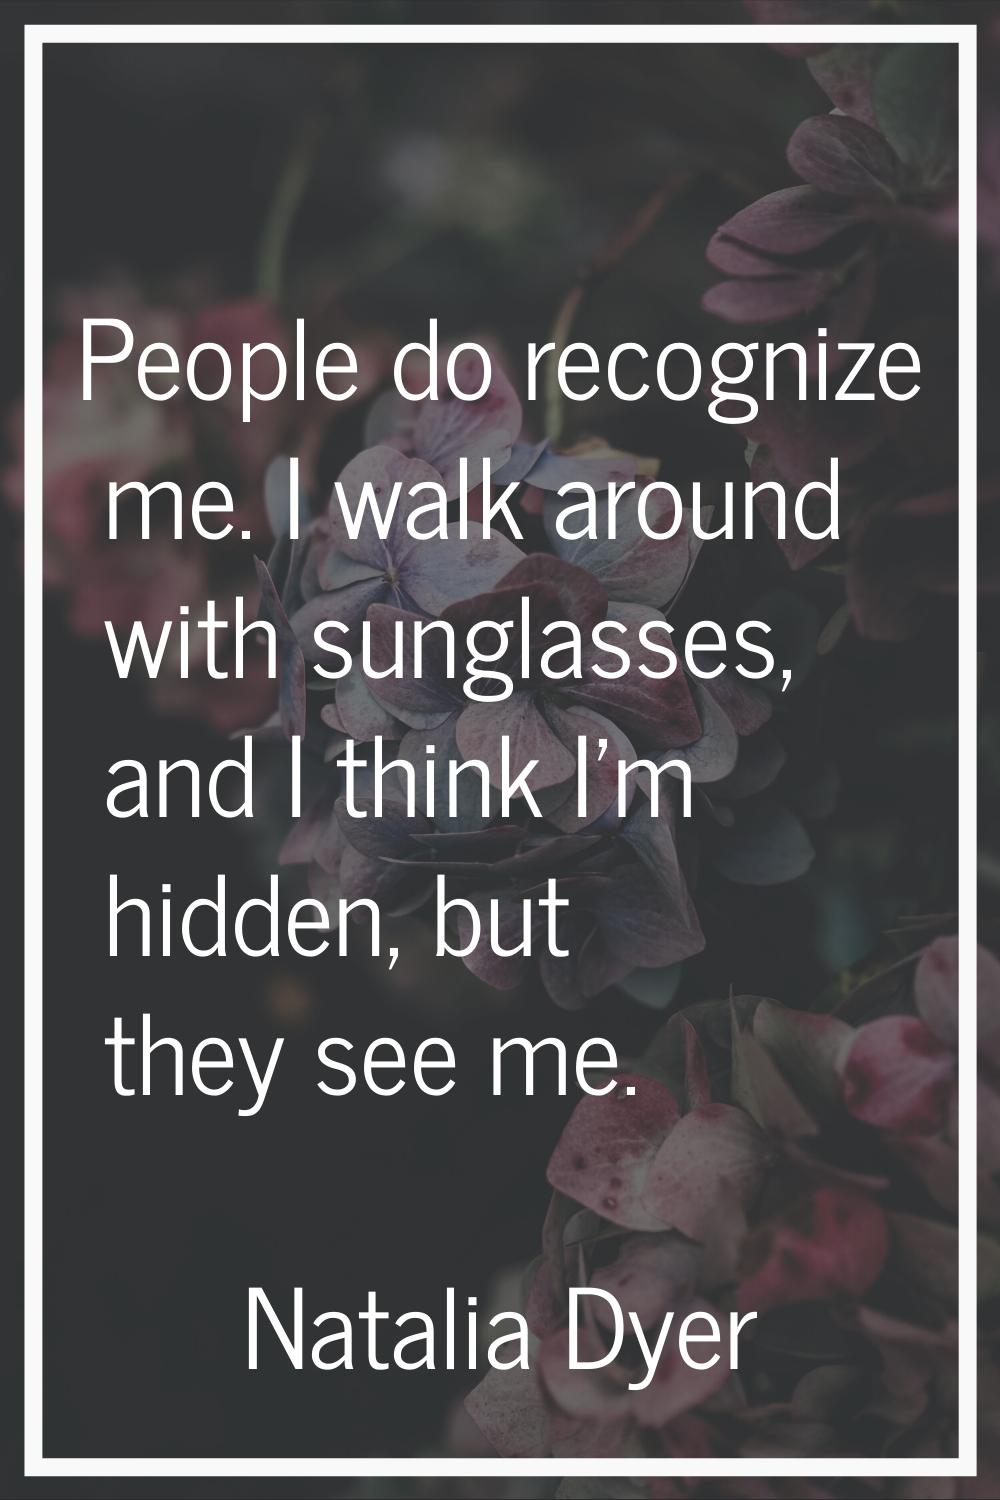 People do recognize me. I walk around with sunglasses, and I think I'm hidden, but they see me.